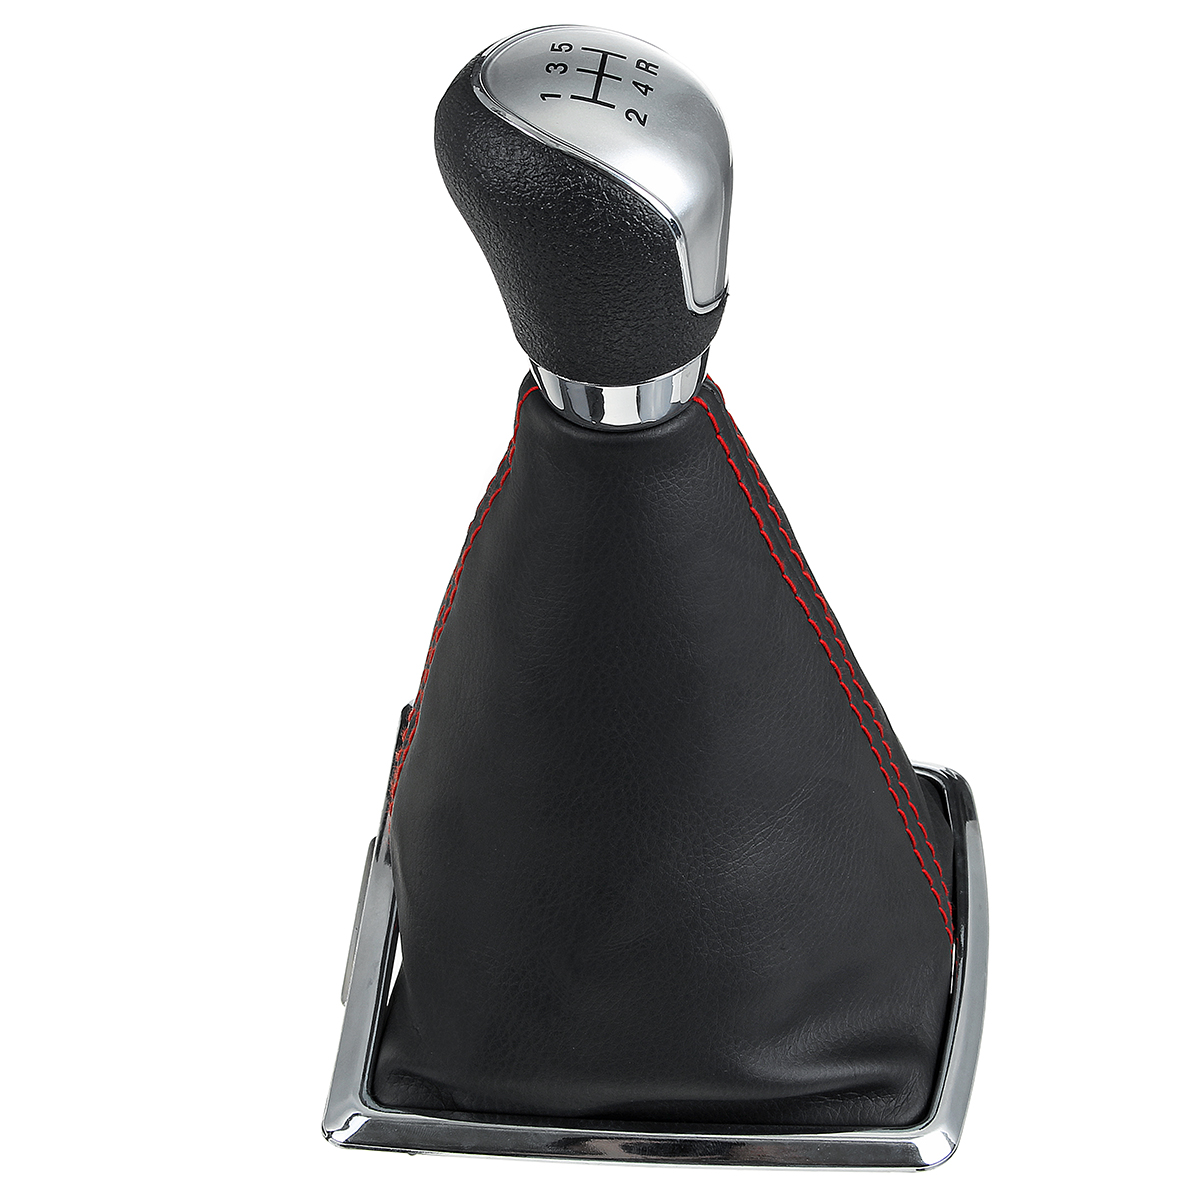 5 Speed MT Gear Stick Shift Knob with Leather Dust Boot Cover For Ford Focus MK2 2005-2012